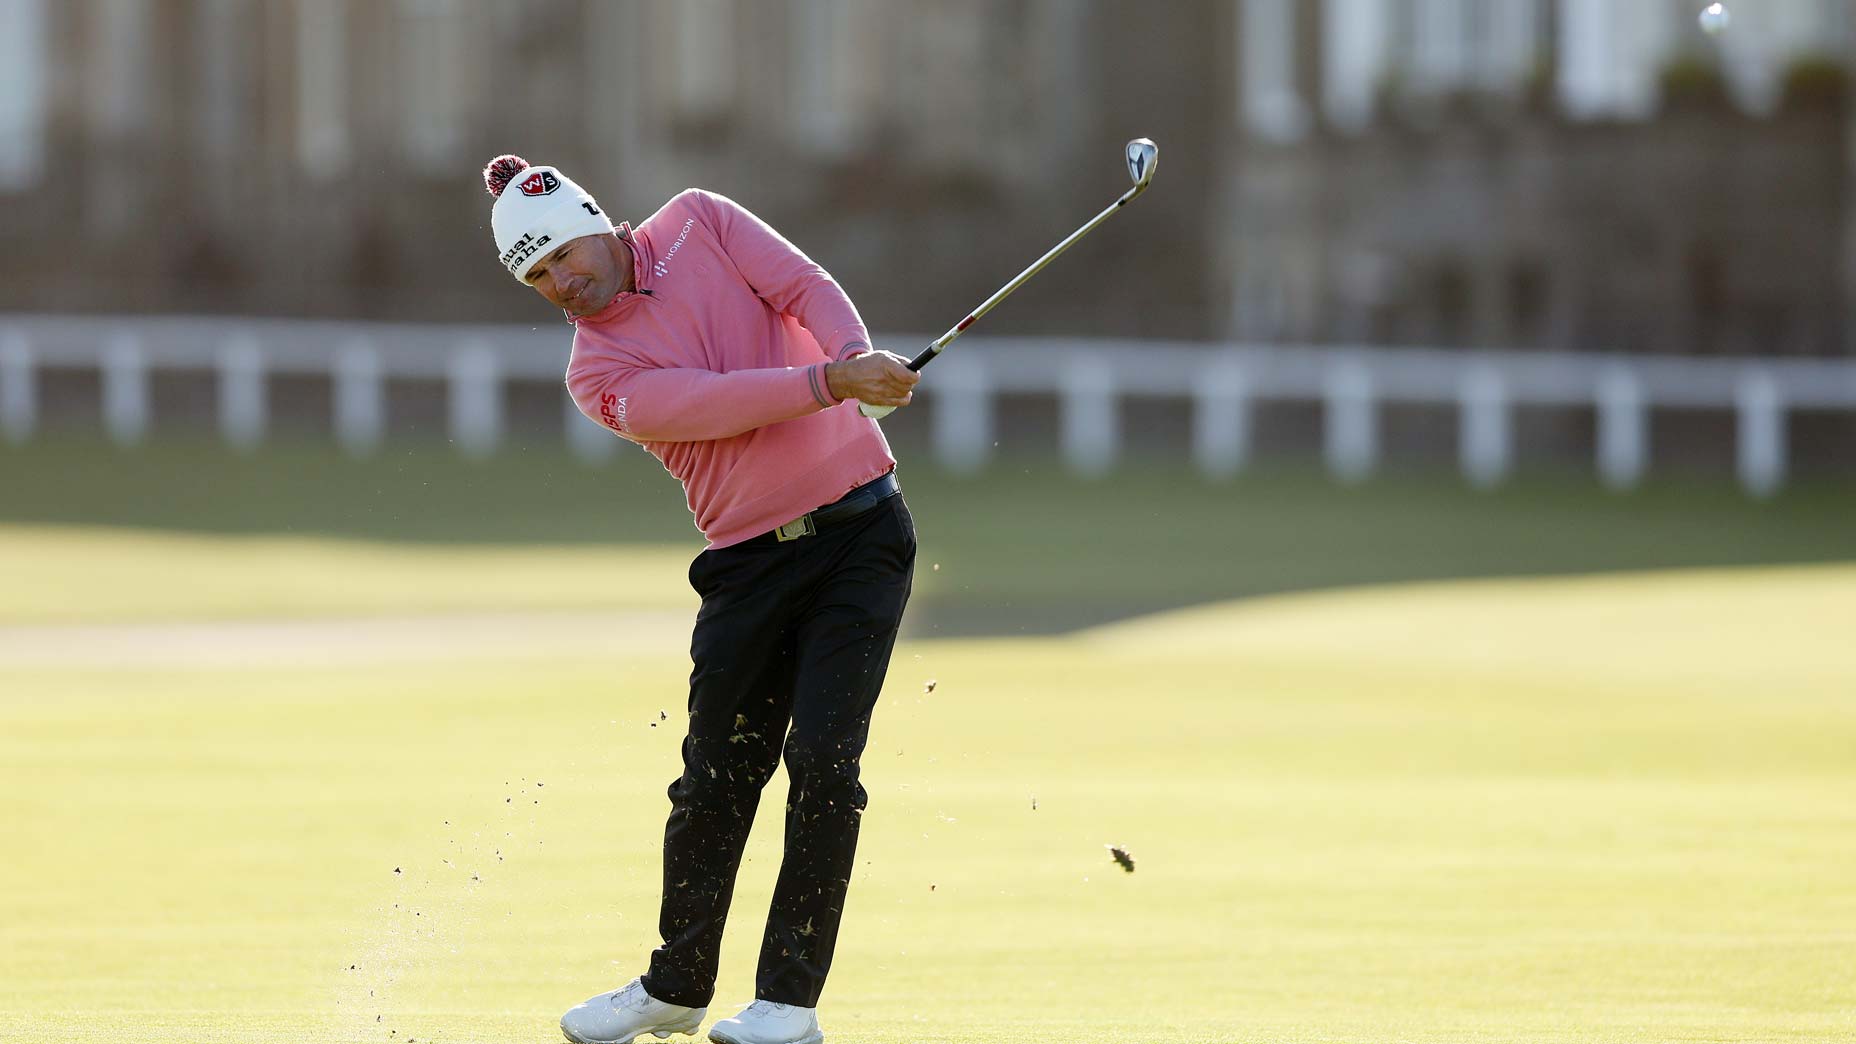 Padraig Harrington of Ireland plays their second shot on the 1st hole on Day Three of the Alfred Dunhill Links Championship on the Old Course St. Andrews on October 01, 2022 in St Andrews, Scotland.